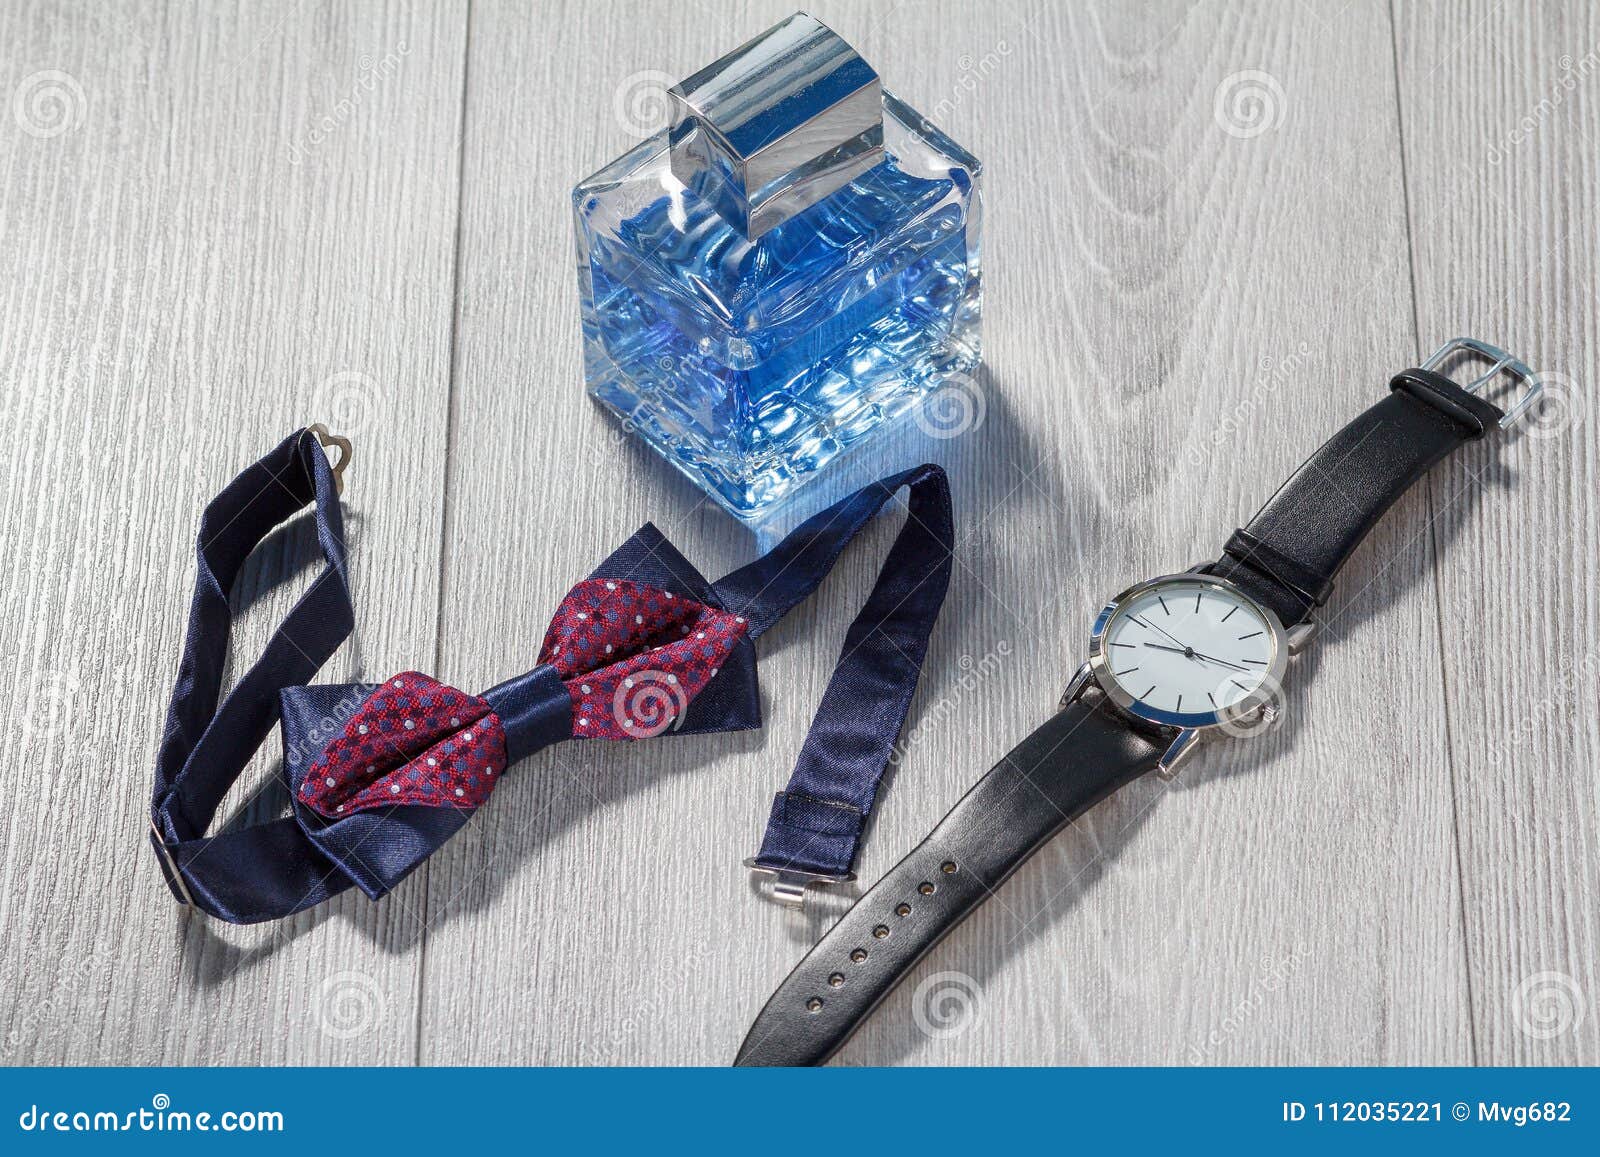 Man Perfume, Watch with a Black Leather Strap and Bow Tie Stock Image ...